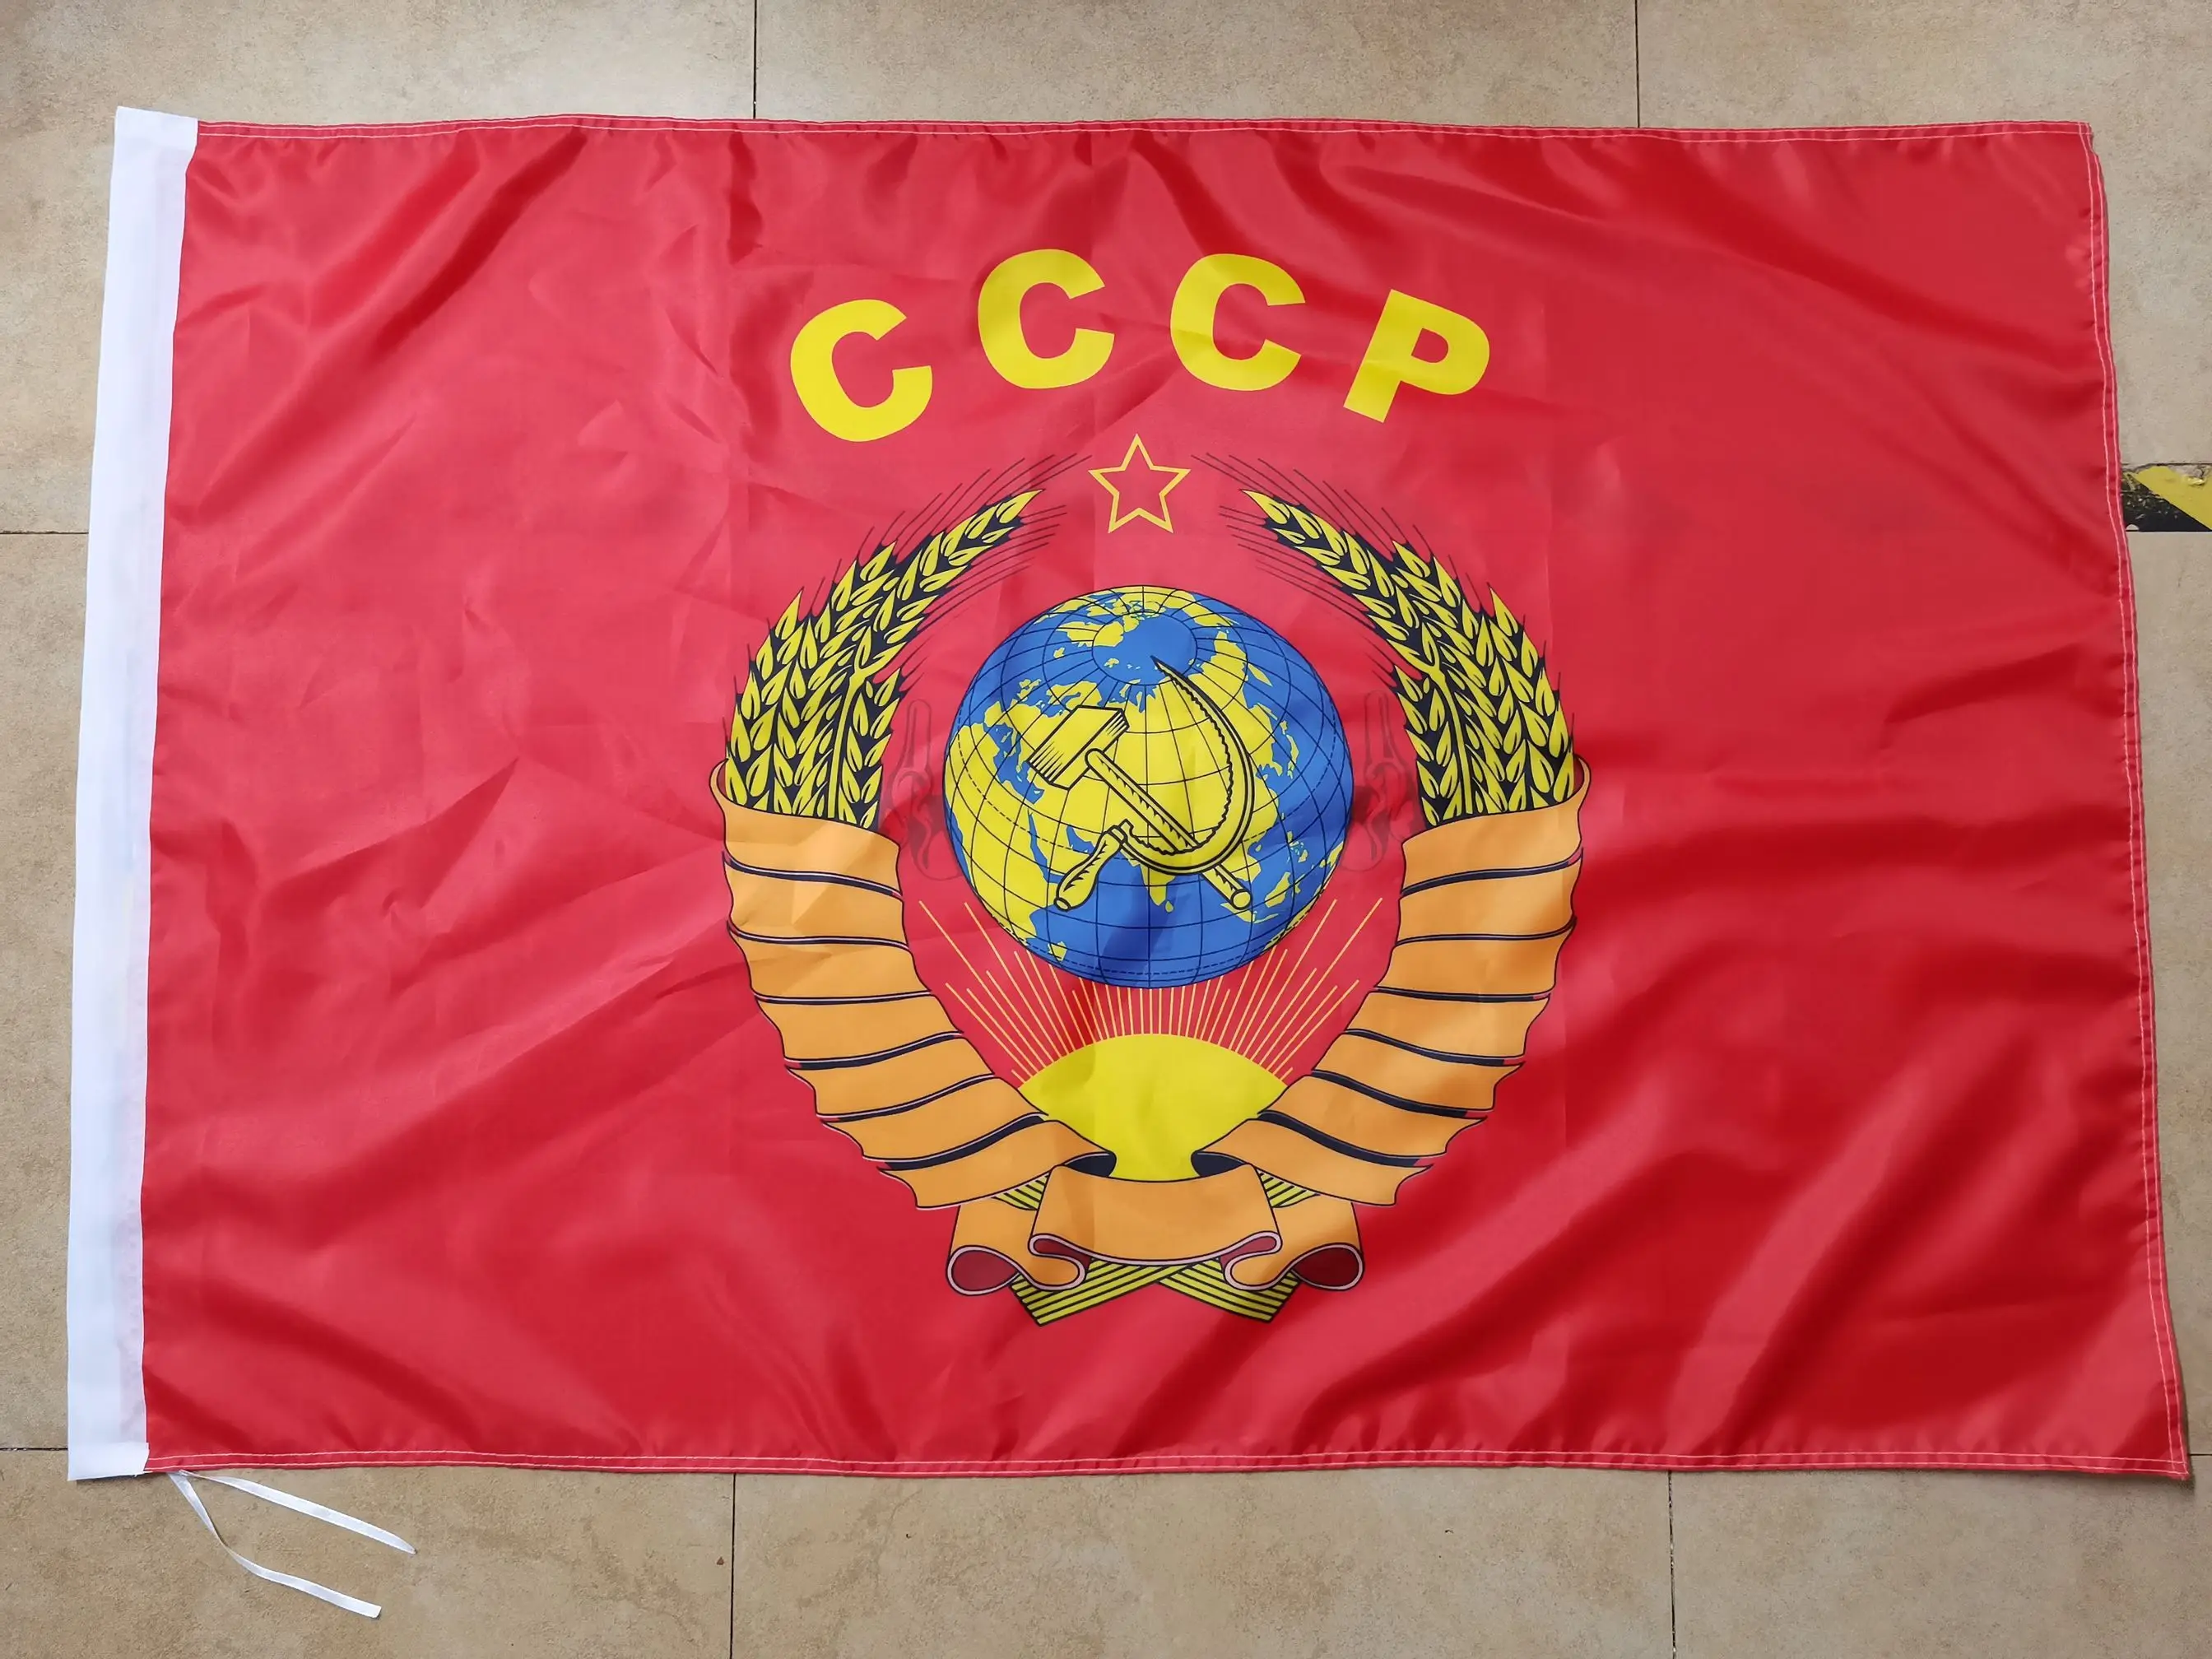 Russian Federation President of Russia Flag 3x5ft Presidential Standard  Banner